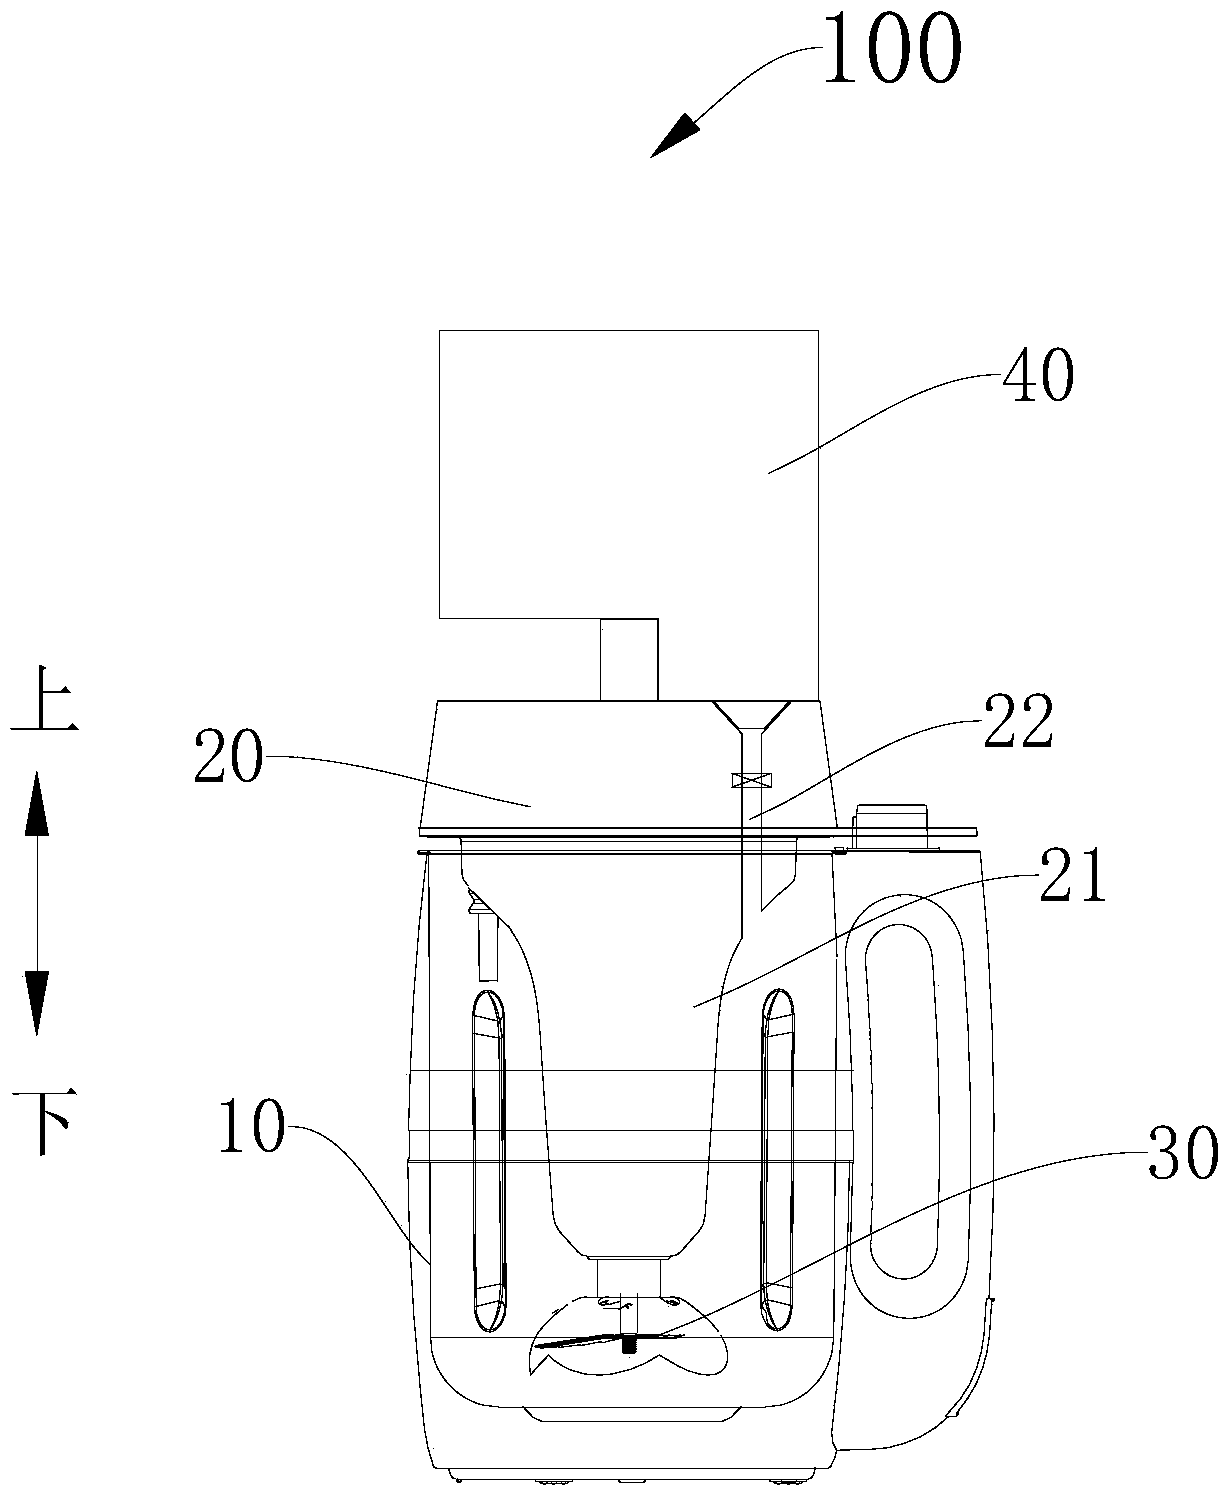 Pulping method for a food processor